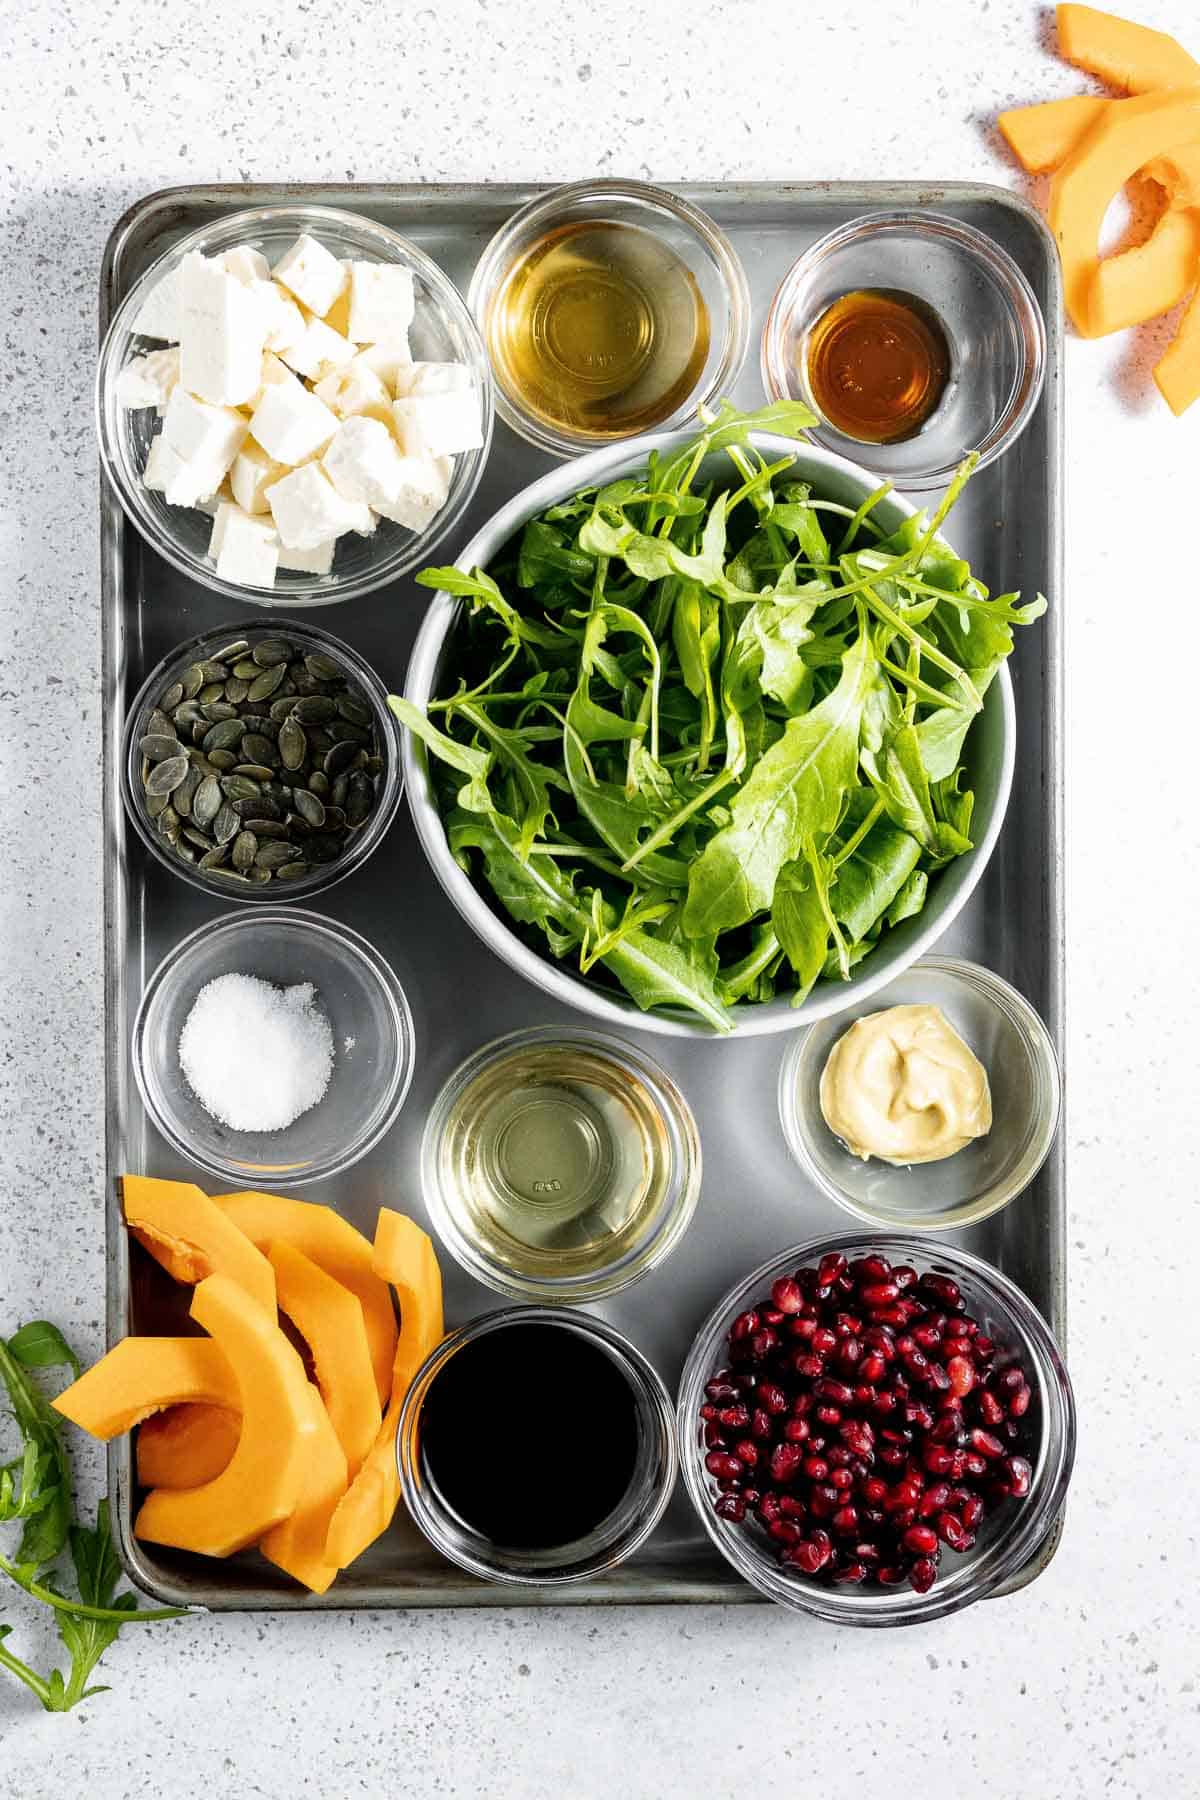 A tray of ingredients for a roasted squash, with arugula salad and pomegranate.